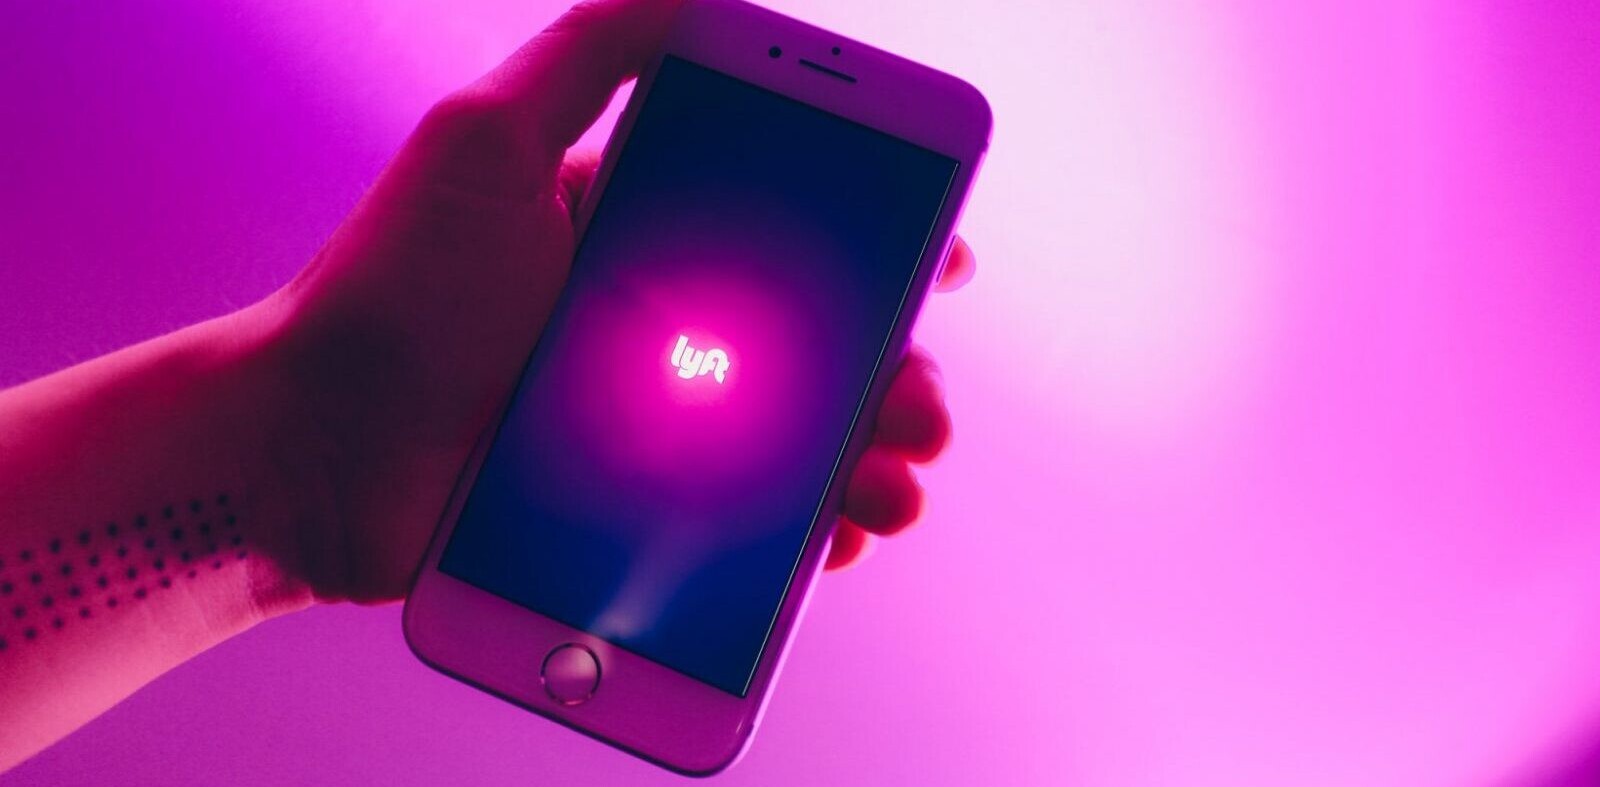 Ride-share companies hit again as Lyft lays off 900 employees, furloughs hundreds more